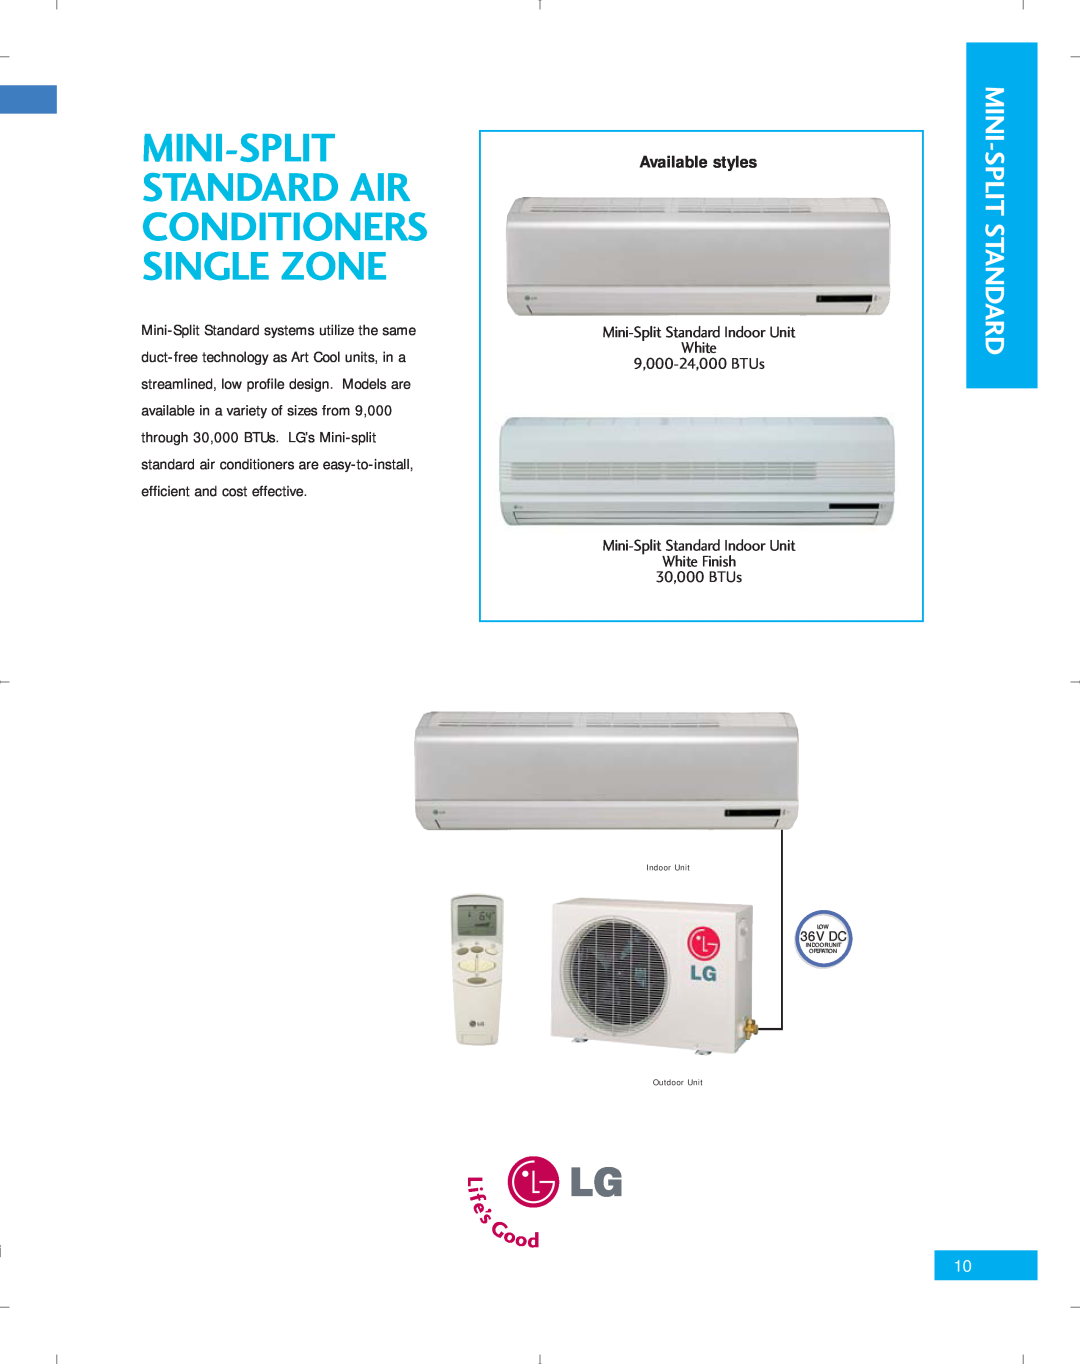 LG Electronics PG-100-2006-VER3 Mini-Split Standard Air Conditioners Single Zone, Available styles, 9,000-24,000 BTUs 